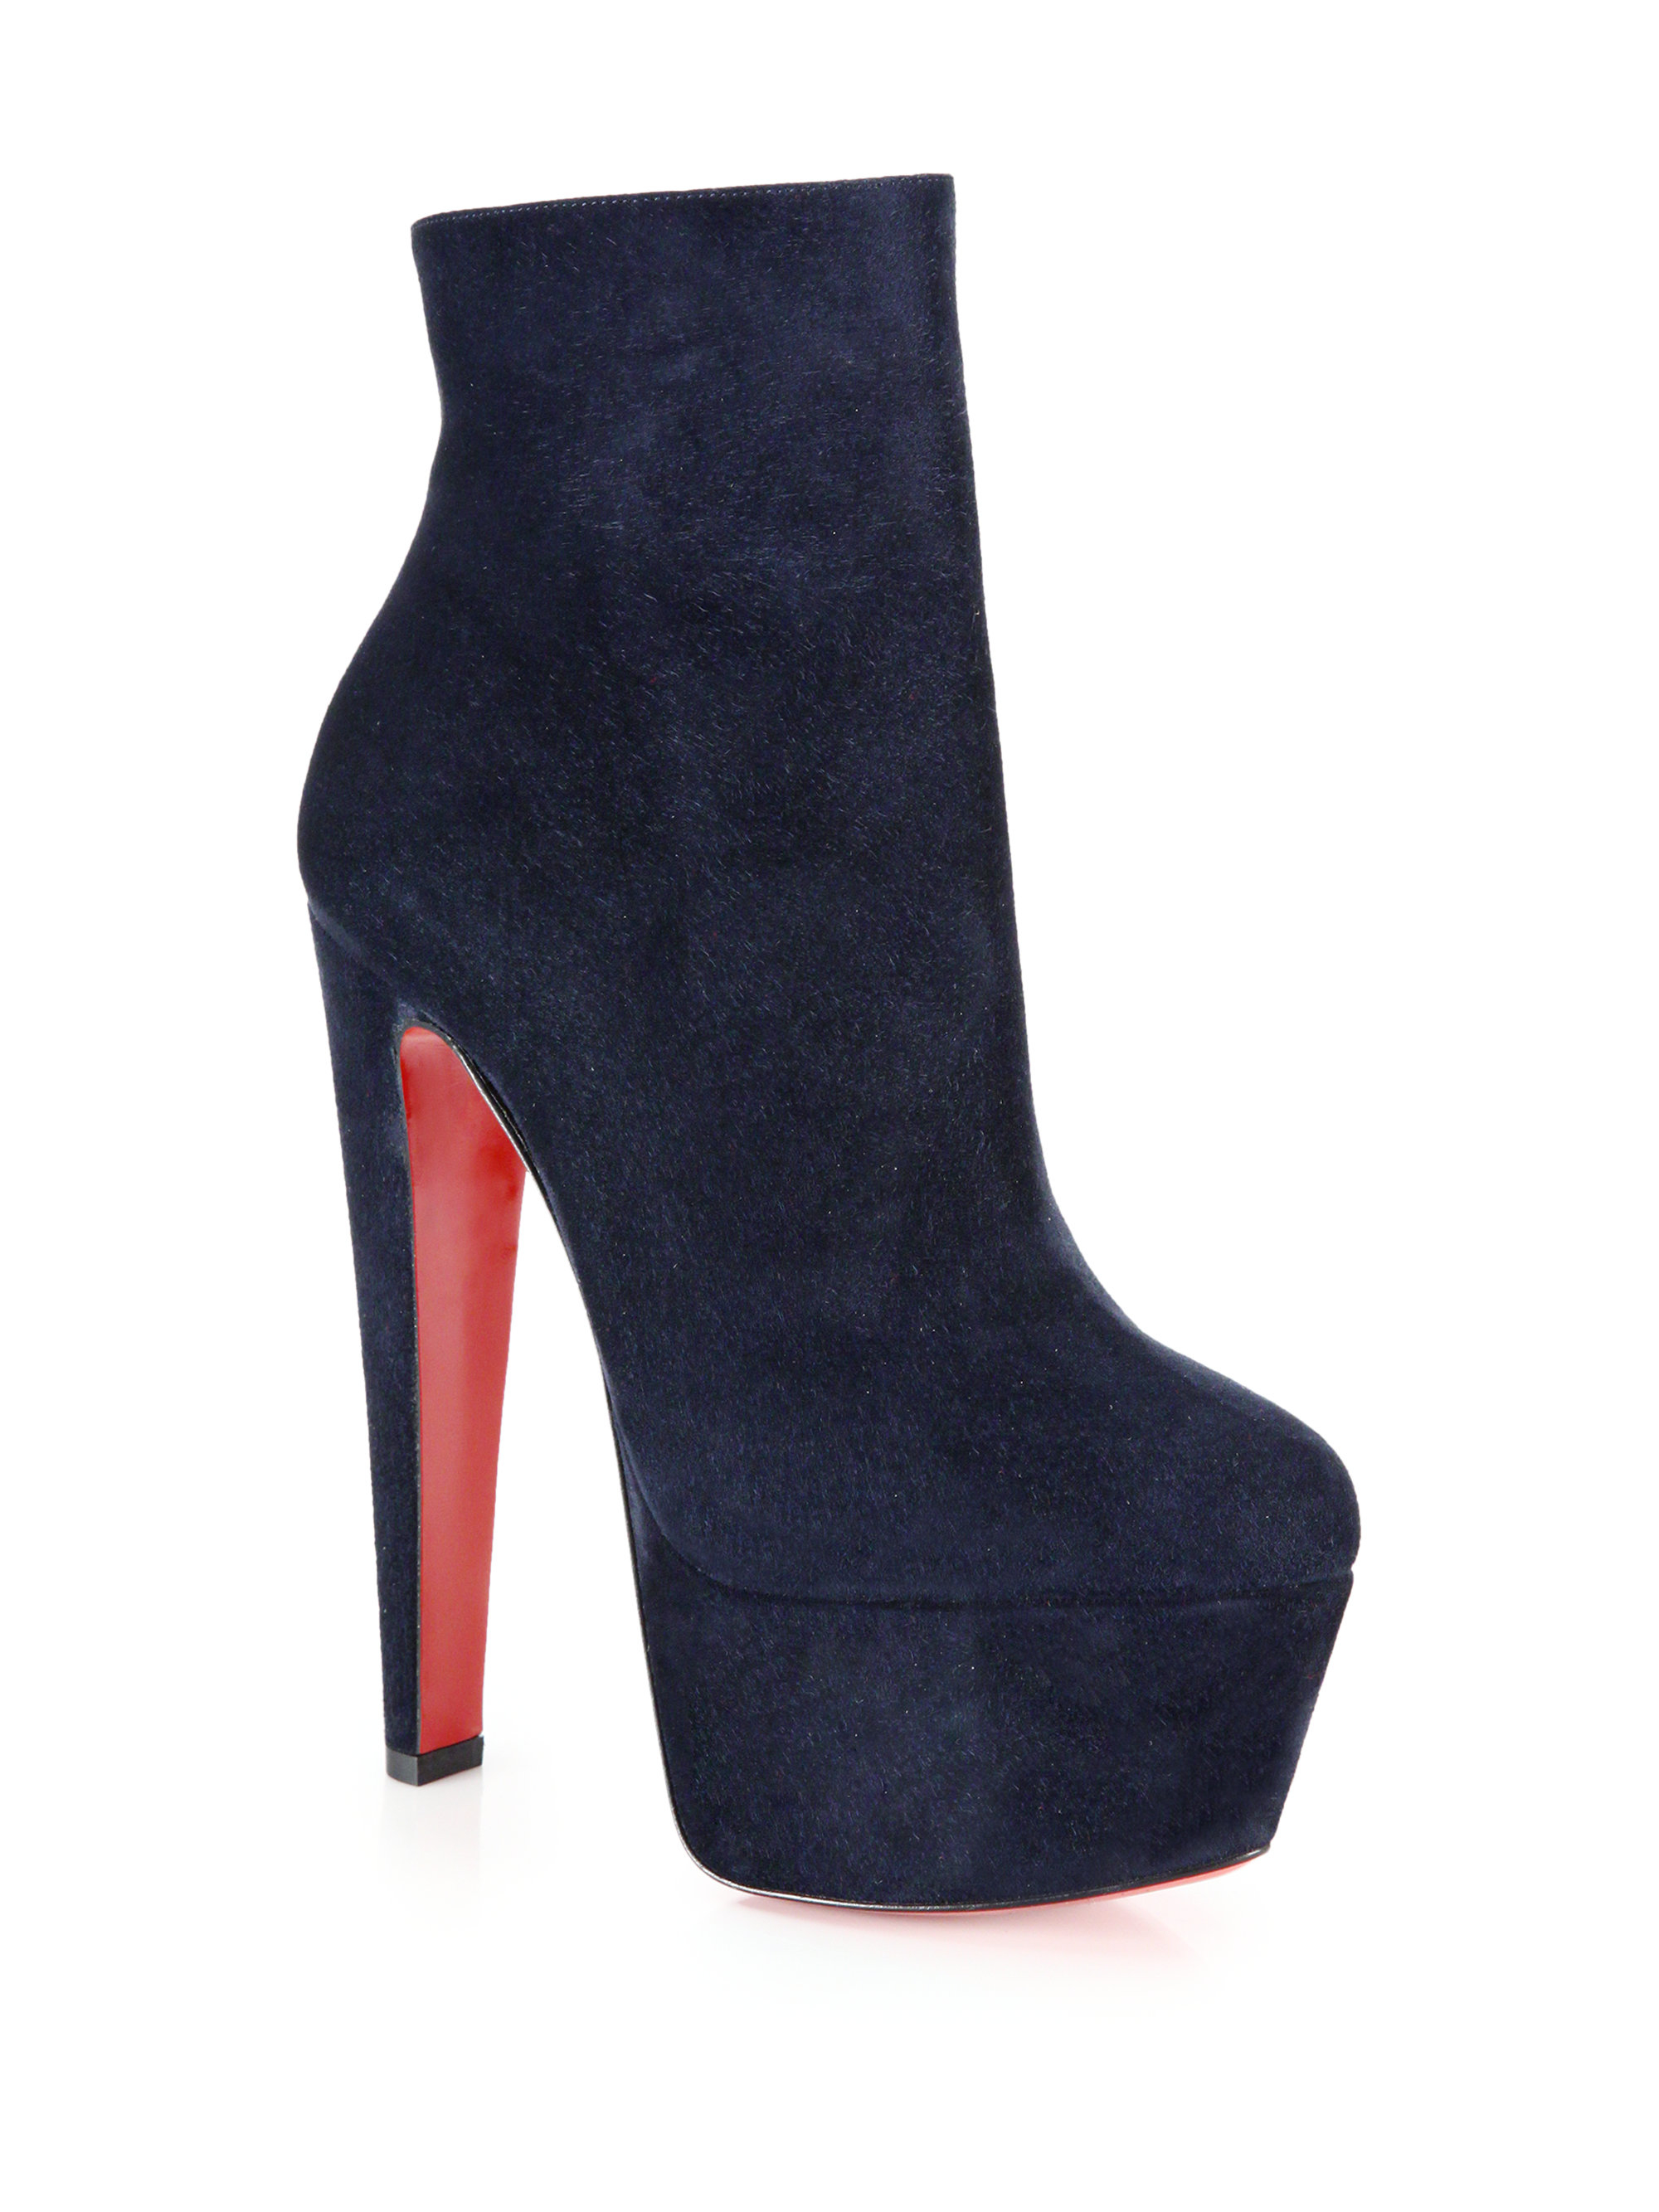 christian louboutins replica - christian louboutin suede platform ankle boots Blue pointed toes ...